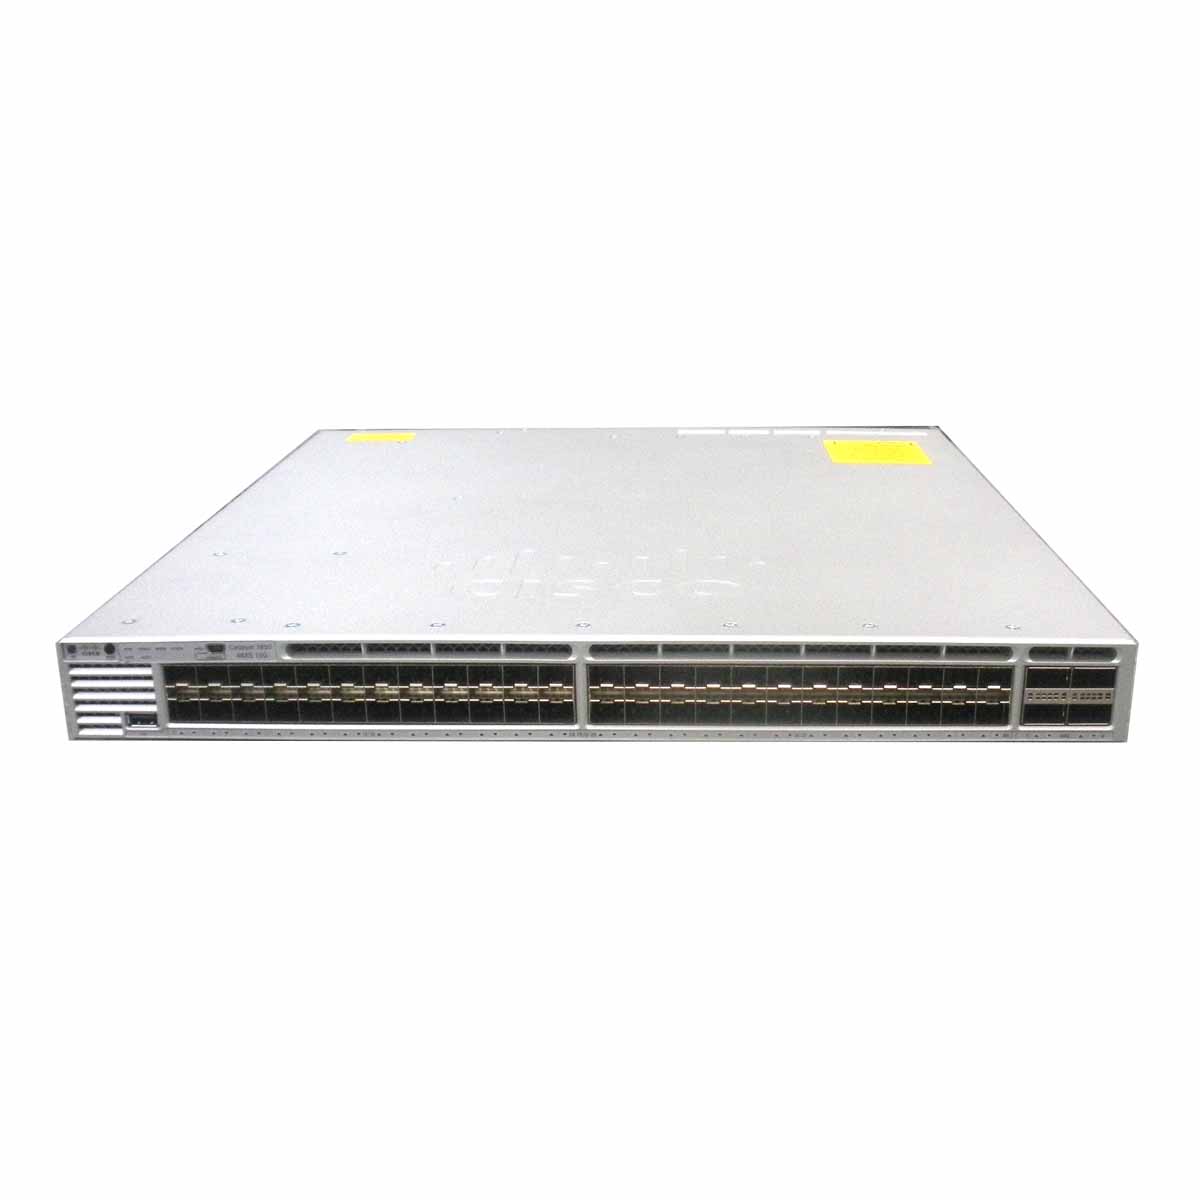 Save on Cisco Catalyst 3850-48XS-F-E Switches from your trusted partners at Flagship Technologies.